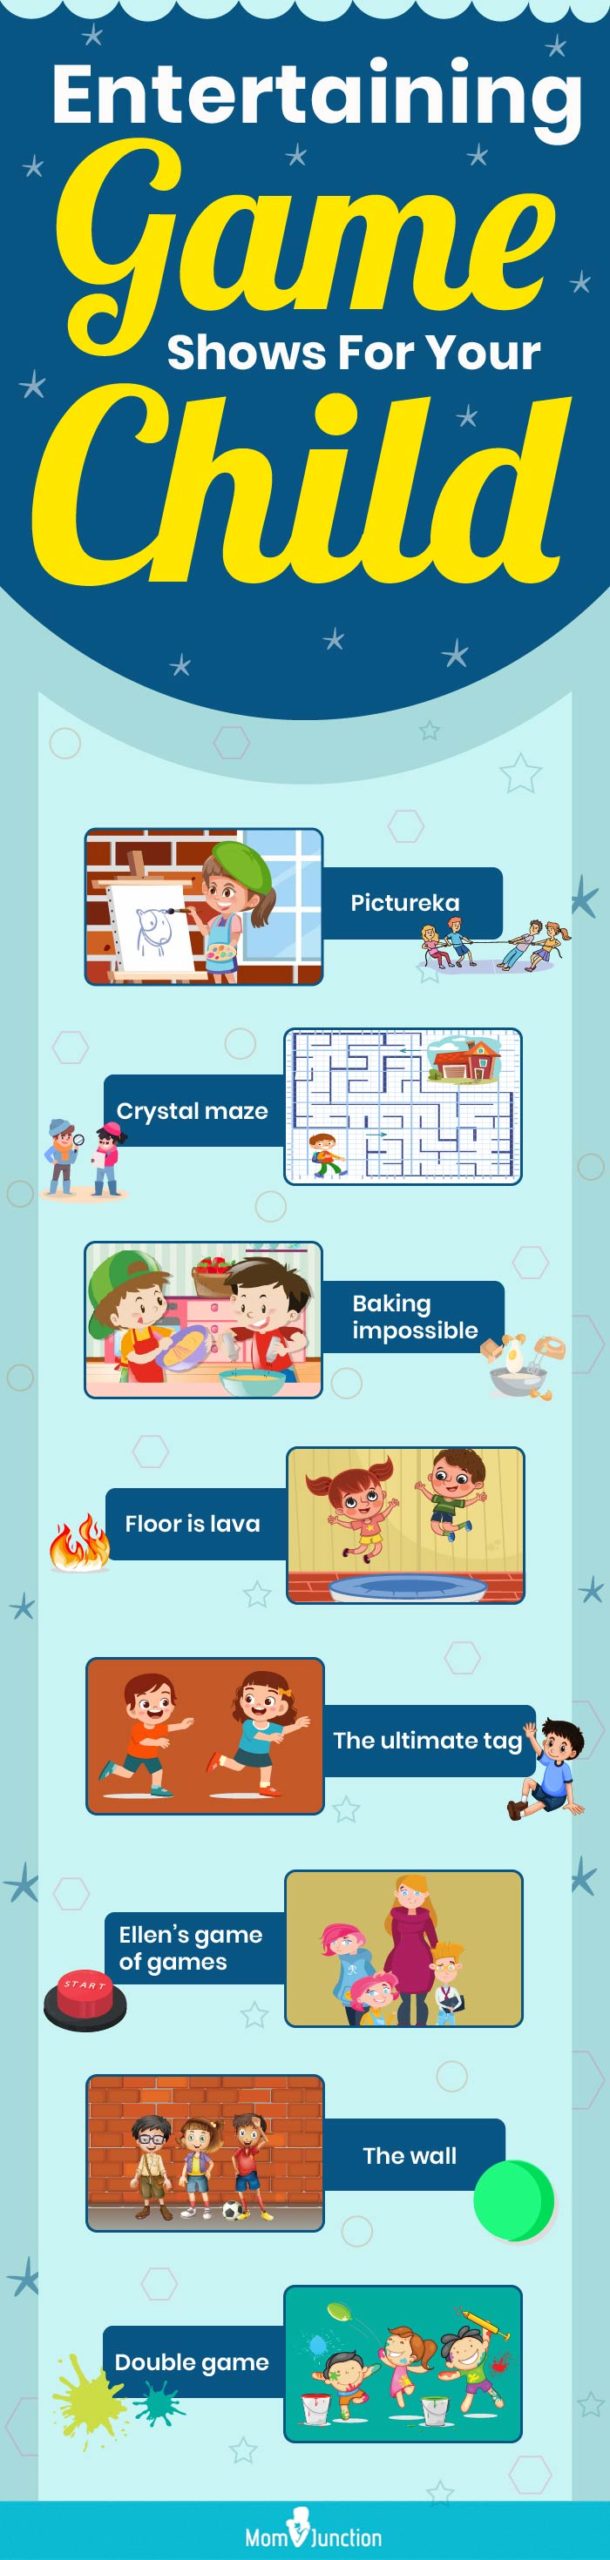 entertaining game shows for your child (infographic)